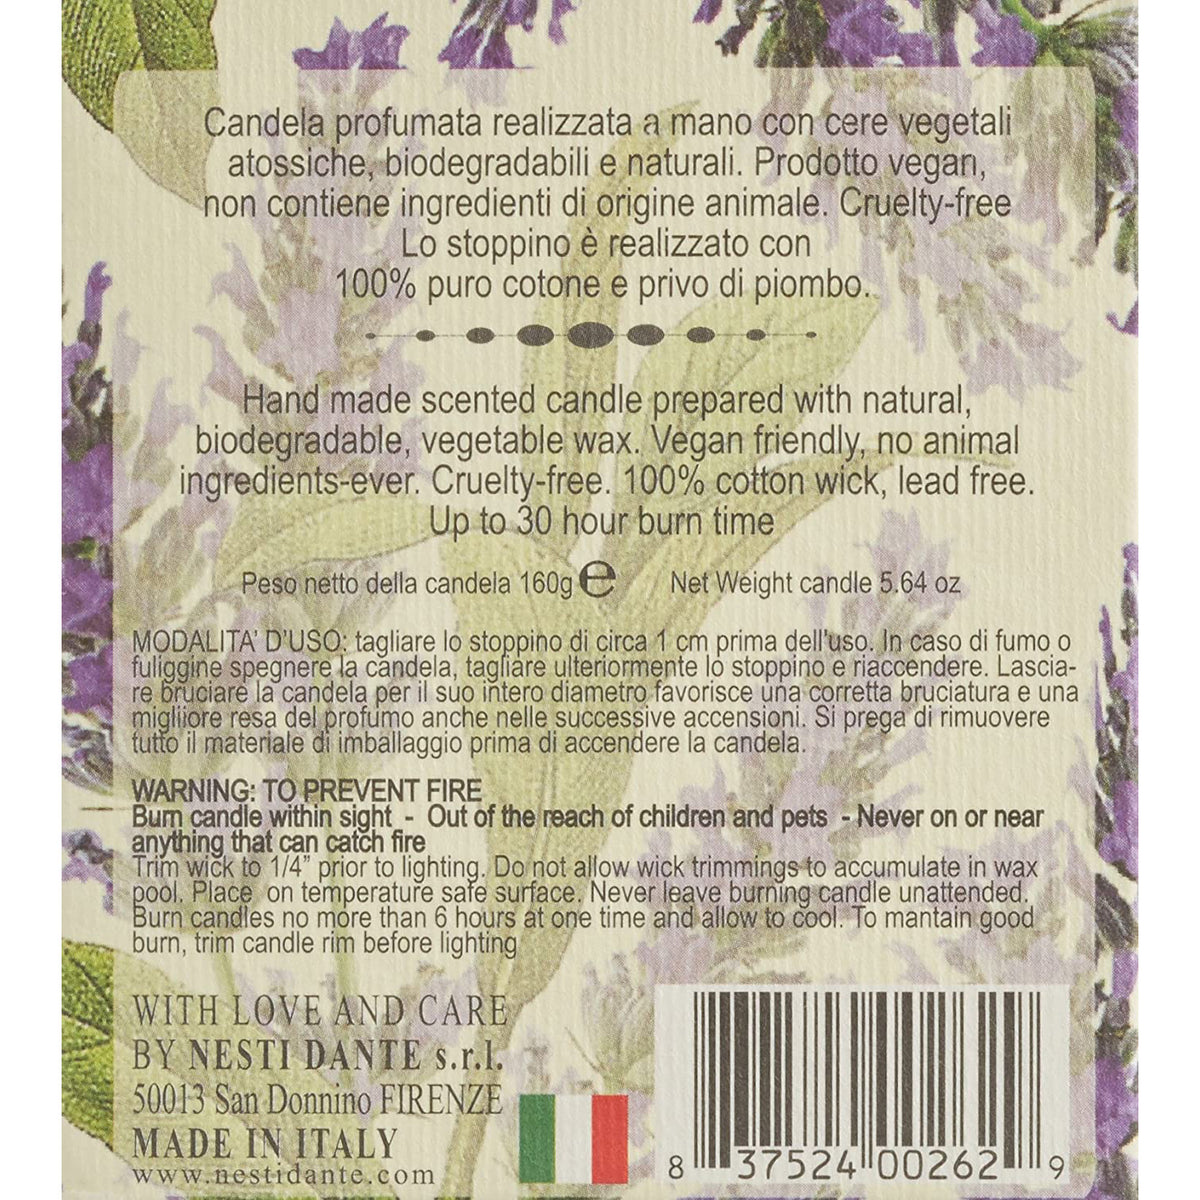 Romantica Scented Candle in Wild Tuscan Lavender and Verbena